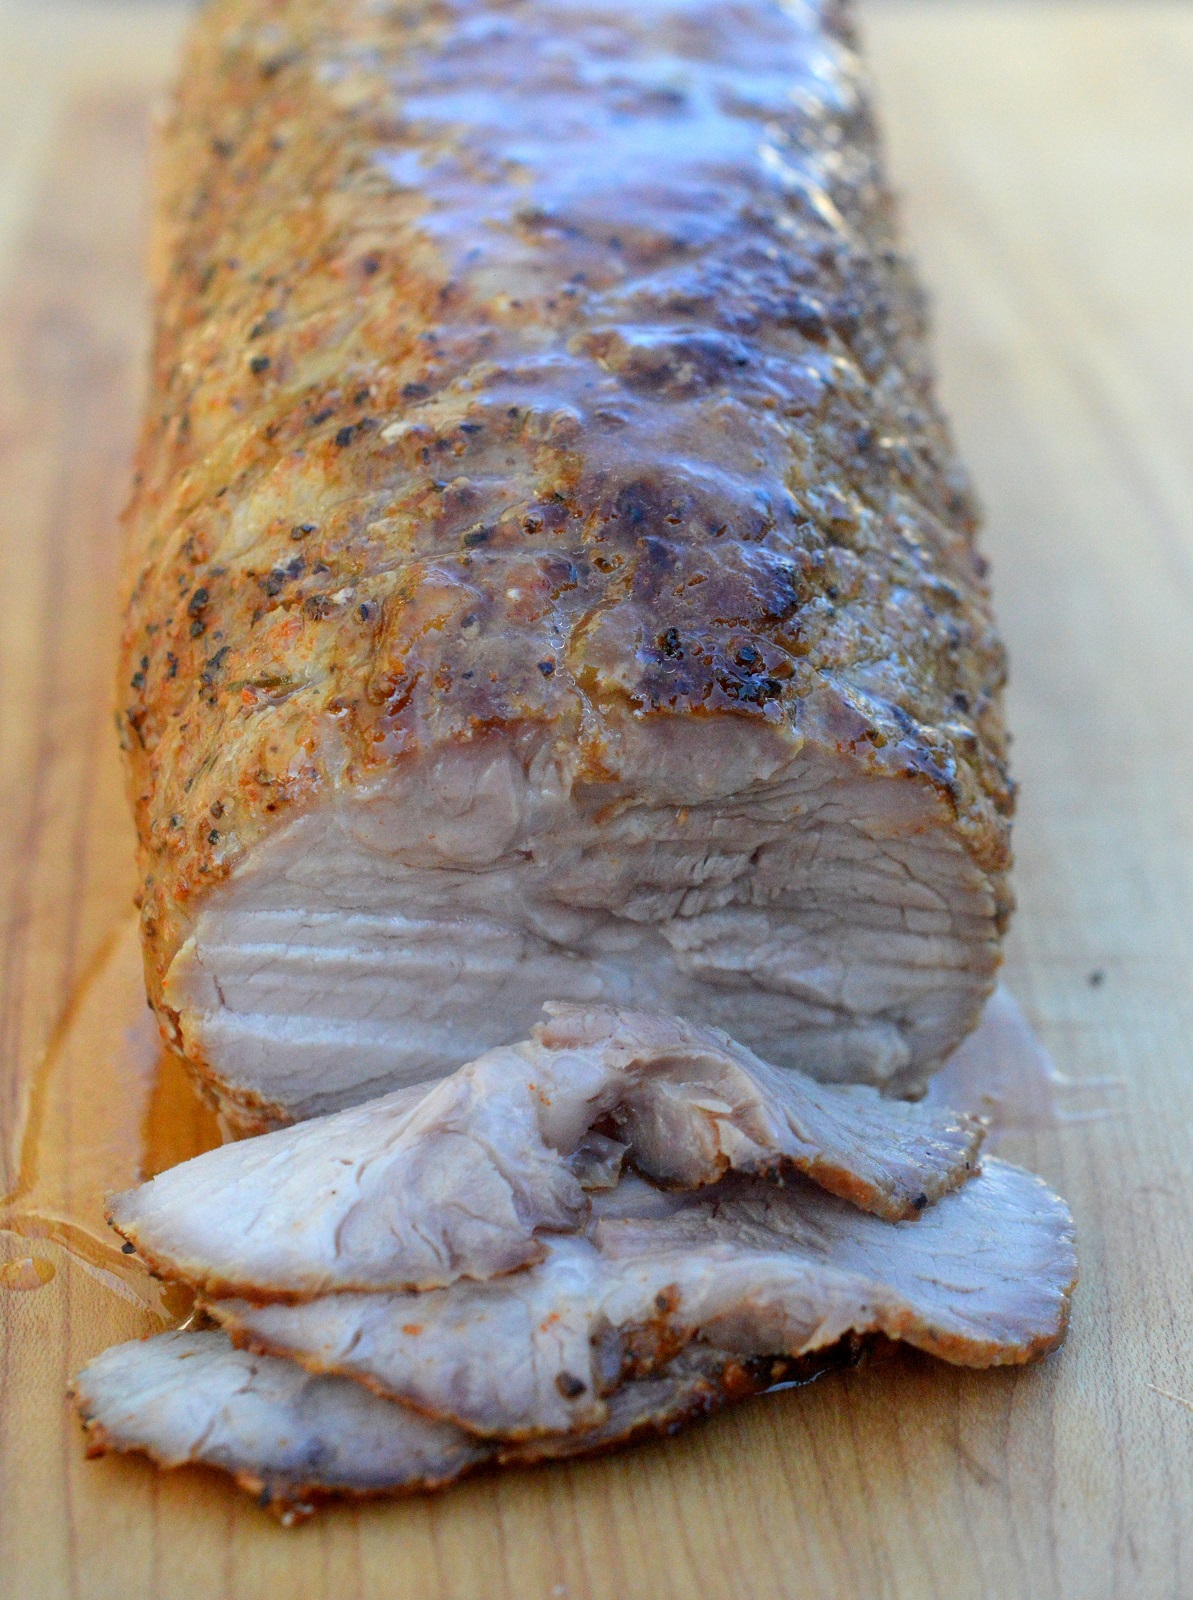 The pork is rested from the previous day’s roasting and ready for slicing to make a Philly Roast Pork Sandwich